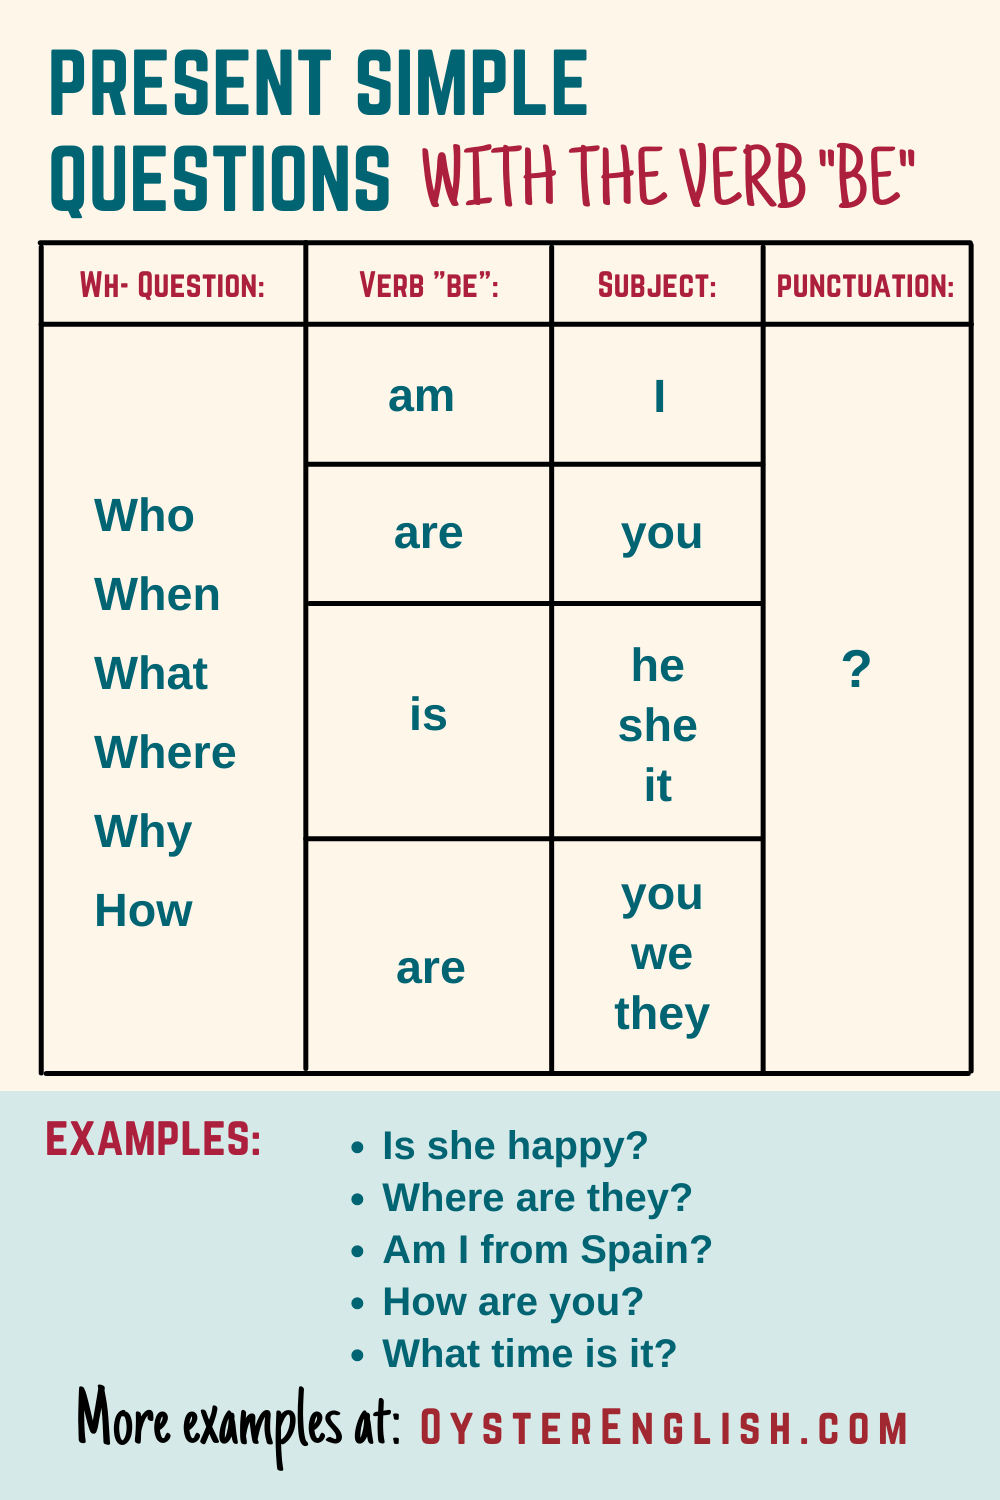 Chart showing how to form -wh questions in the present simple with the verb 